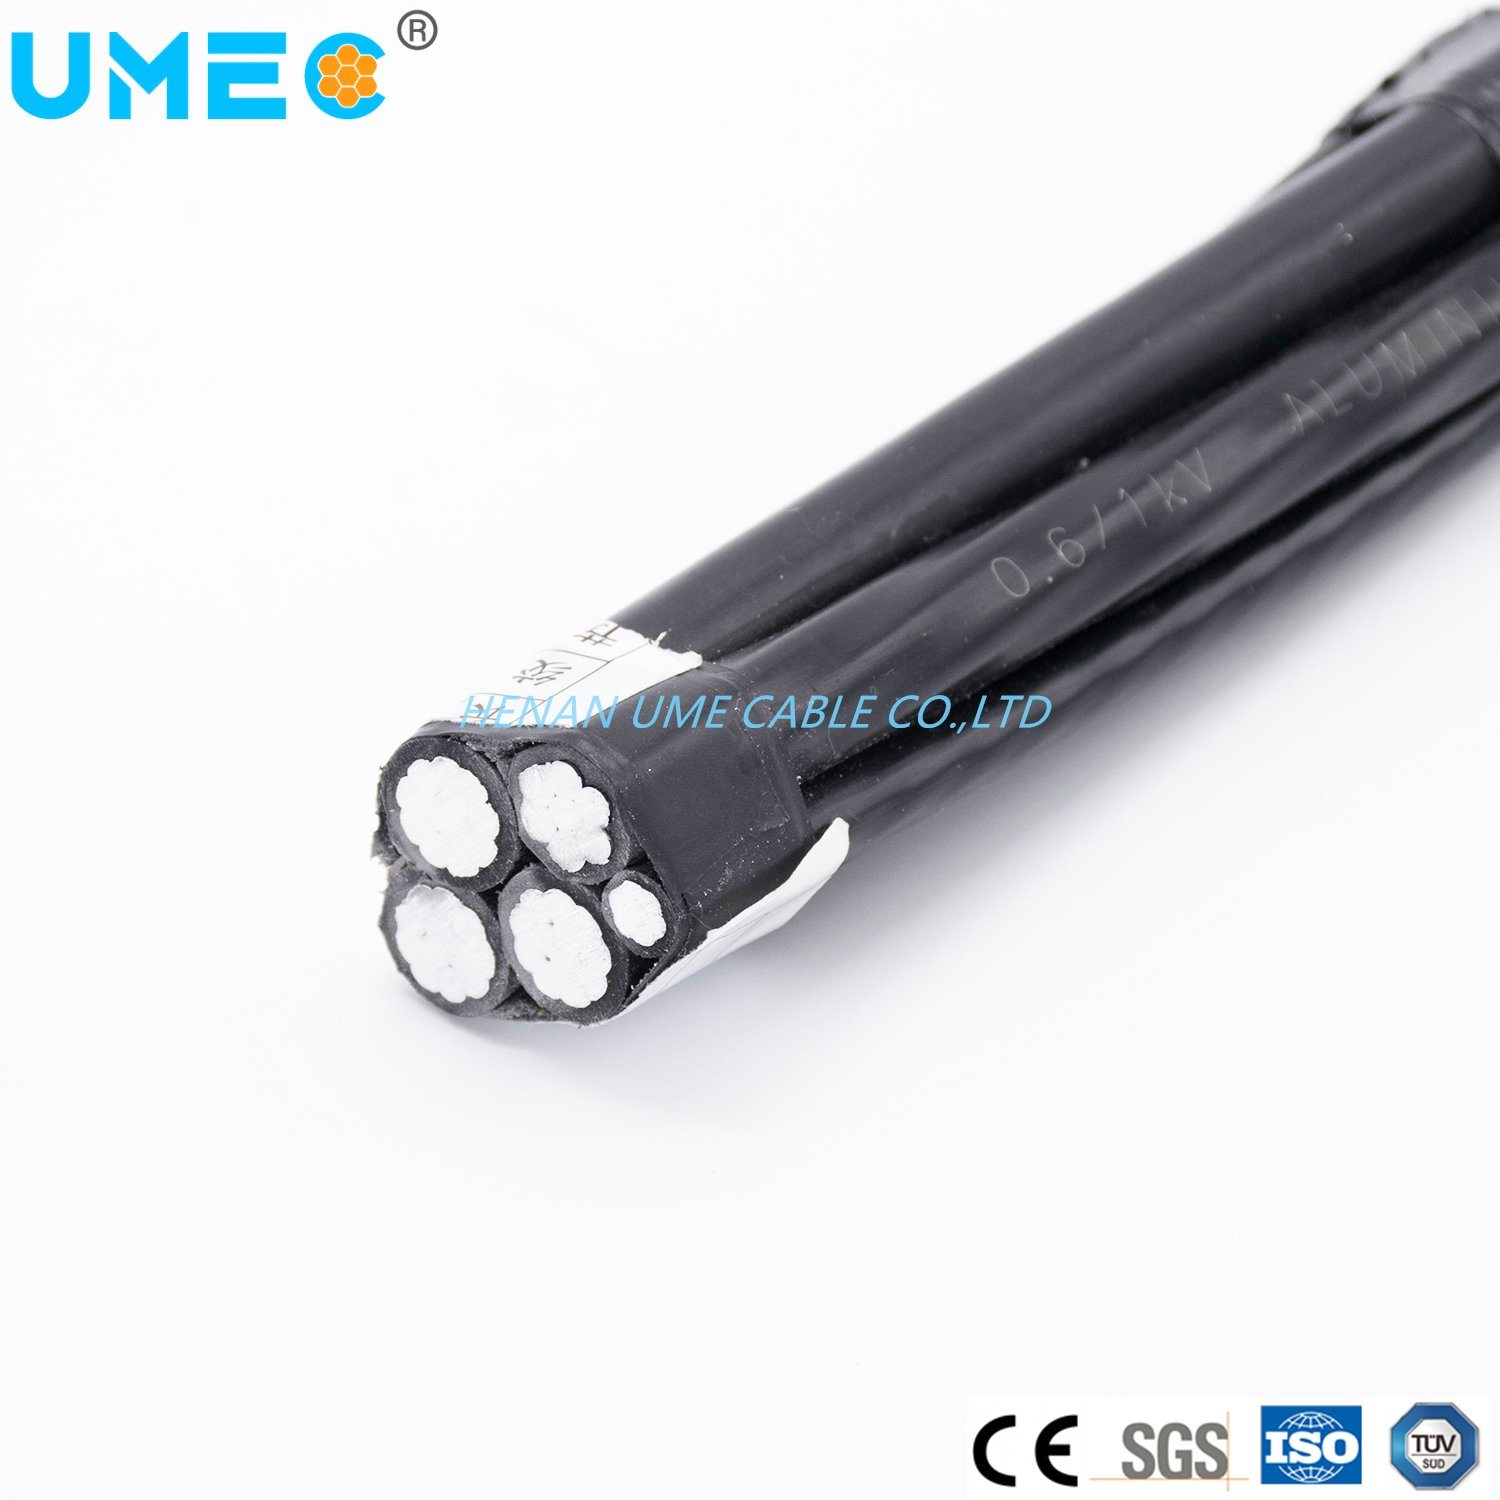 Street Light Conductor Caai Cable Self-Supporting Cable